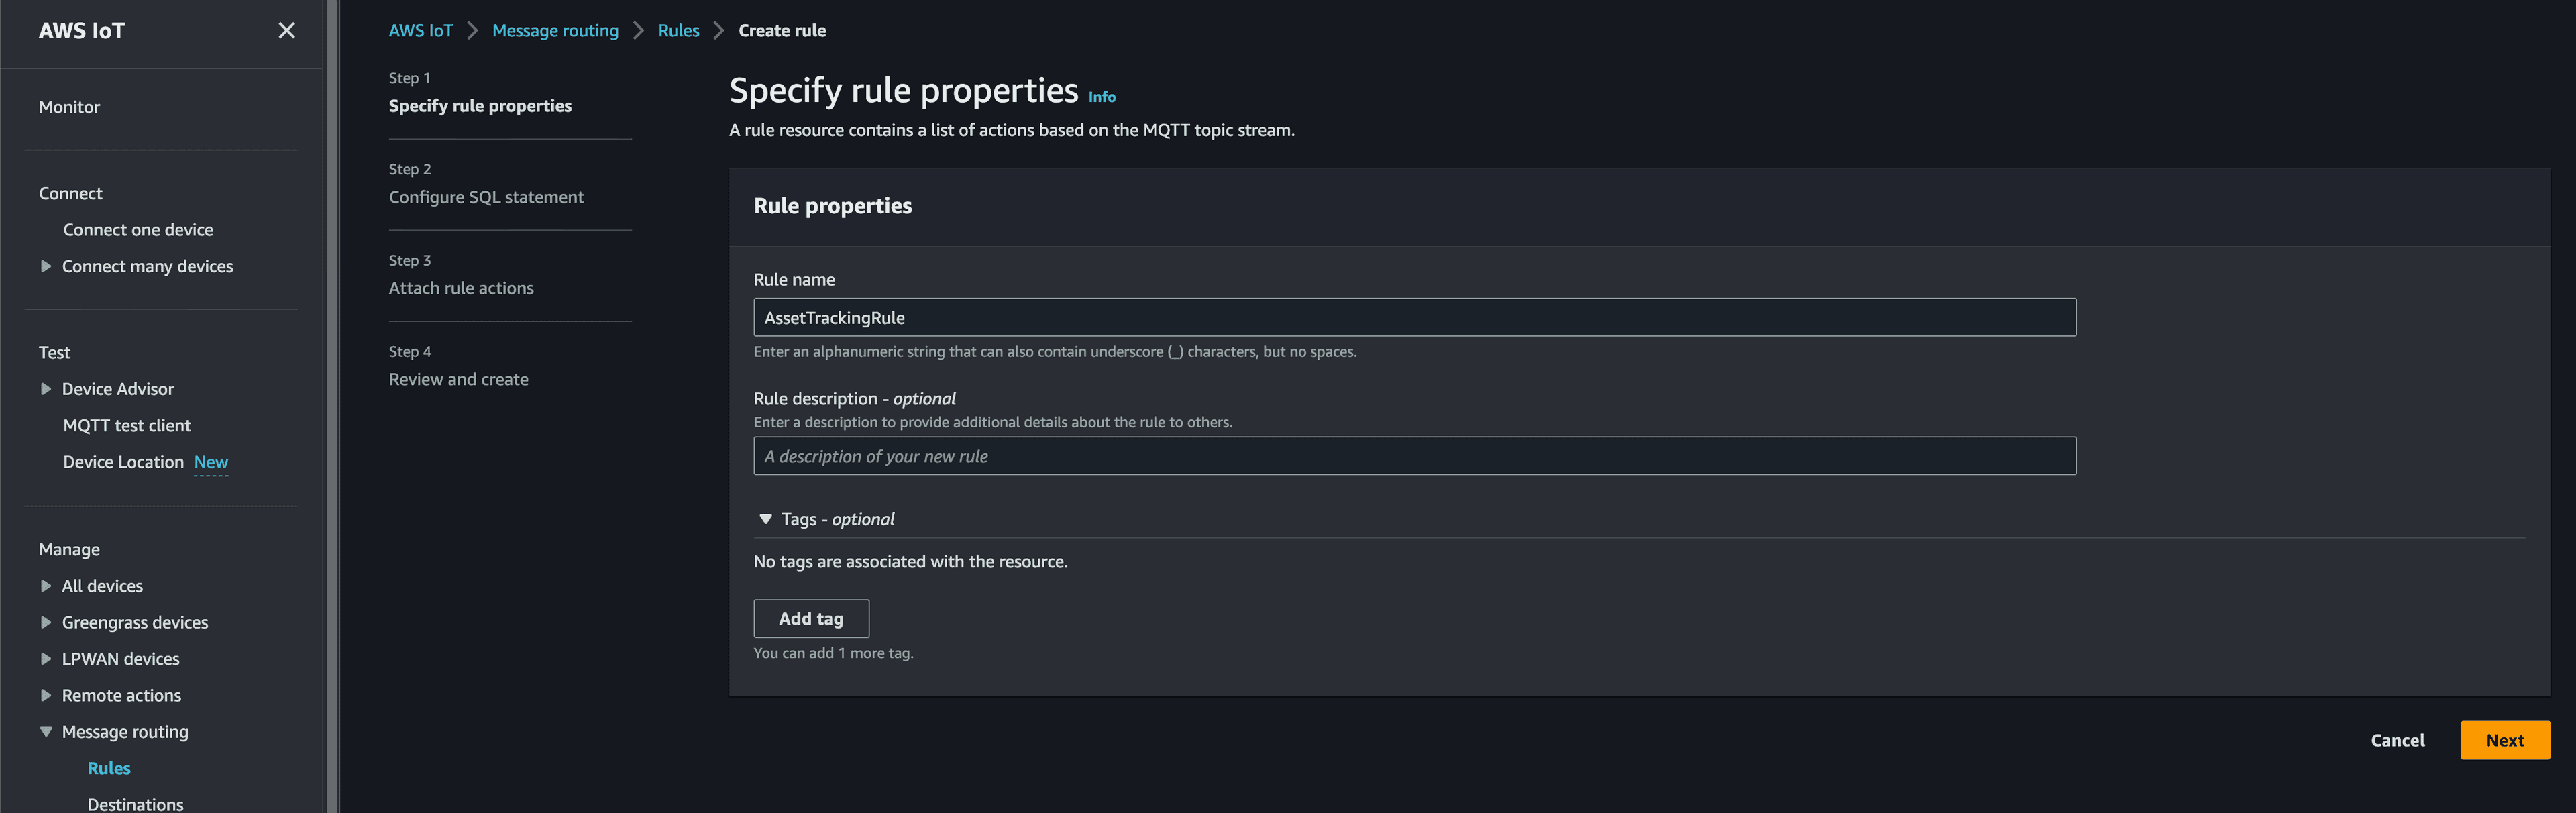 AWS IoT Core Console showing specifying a rules properties